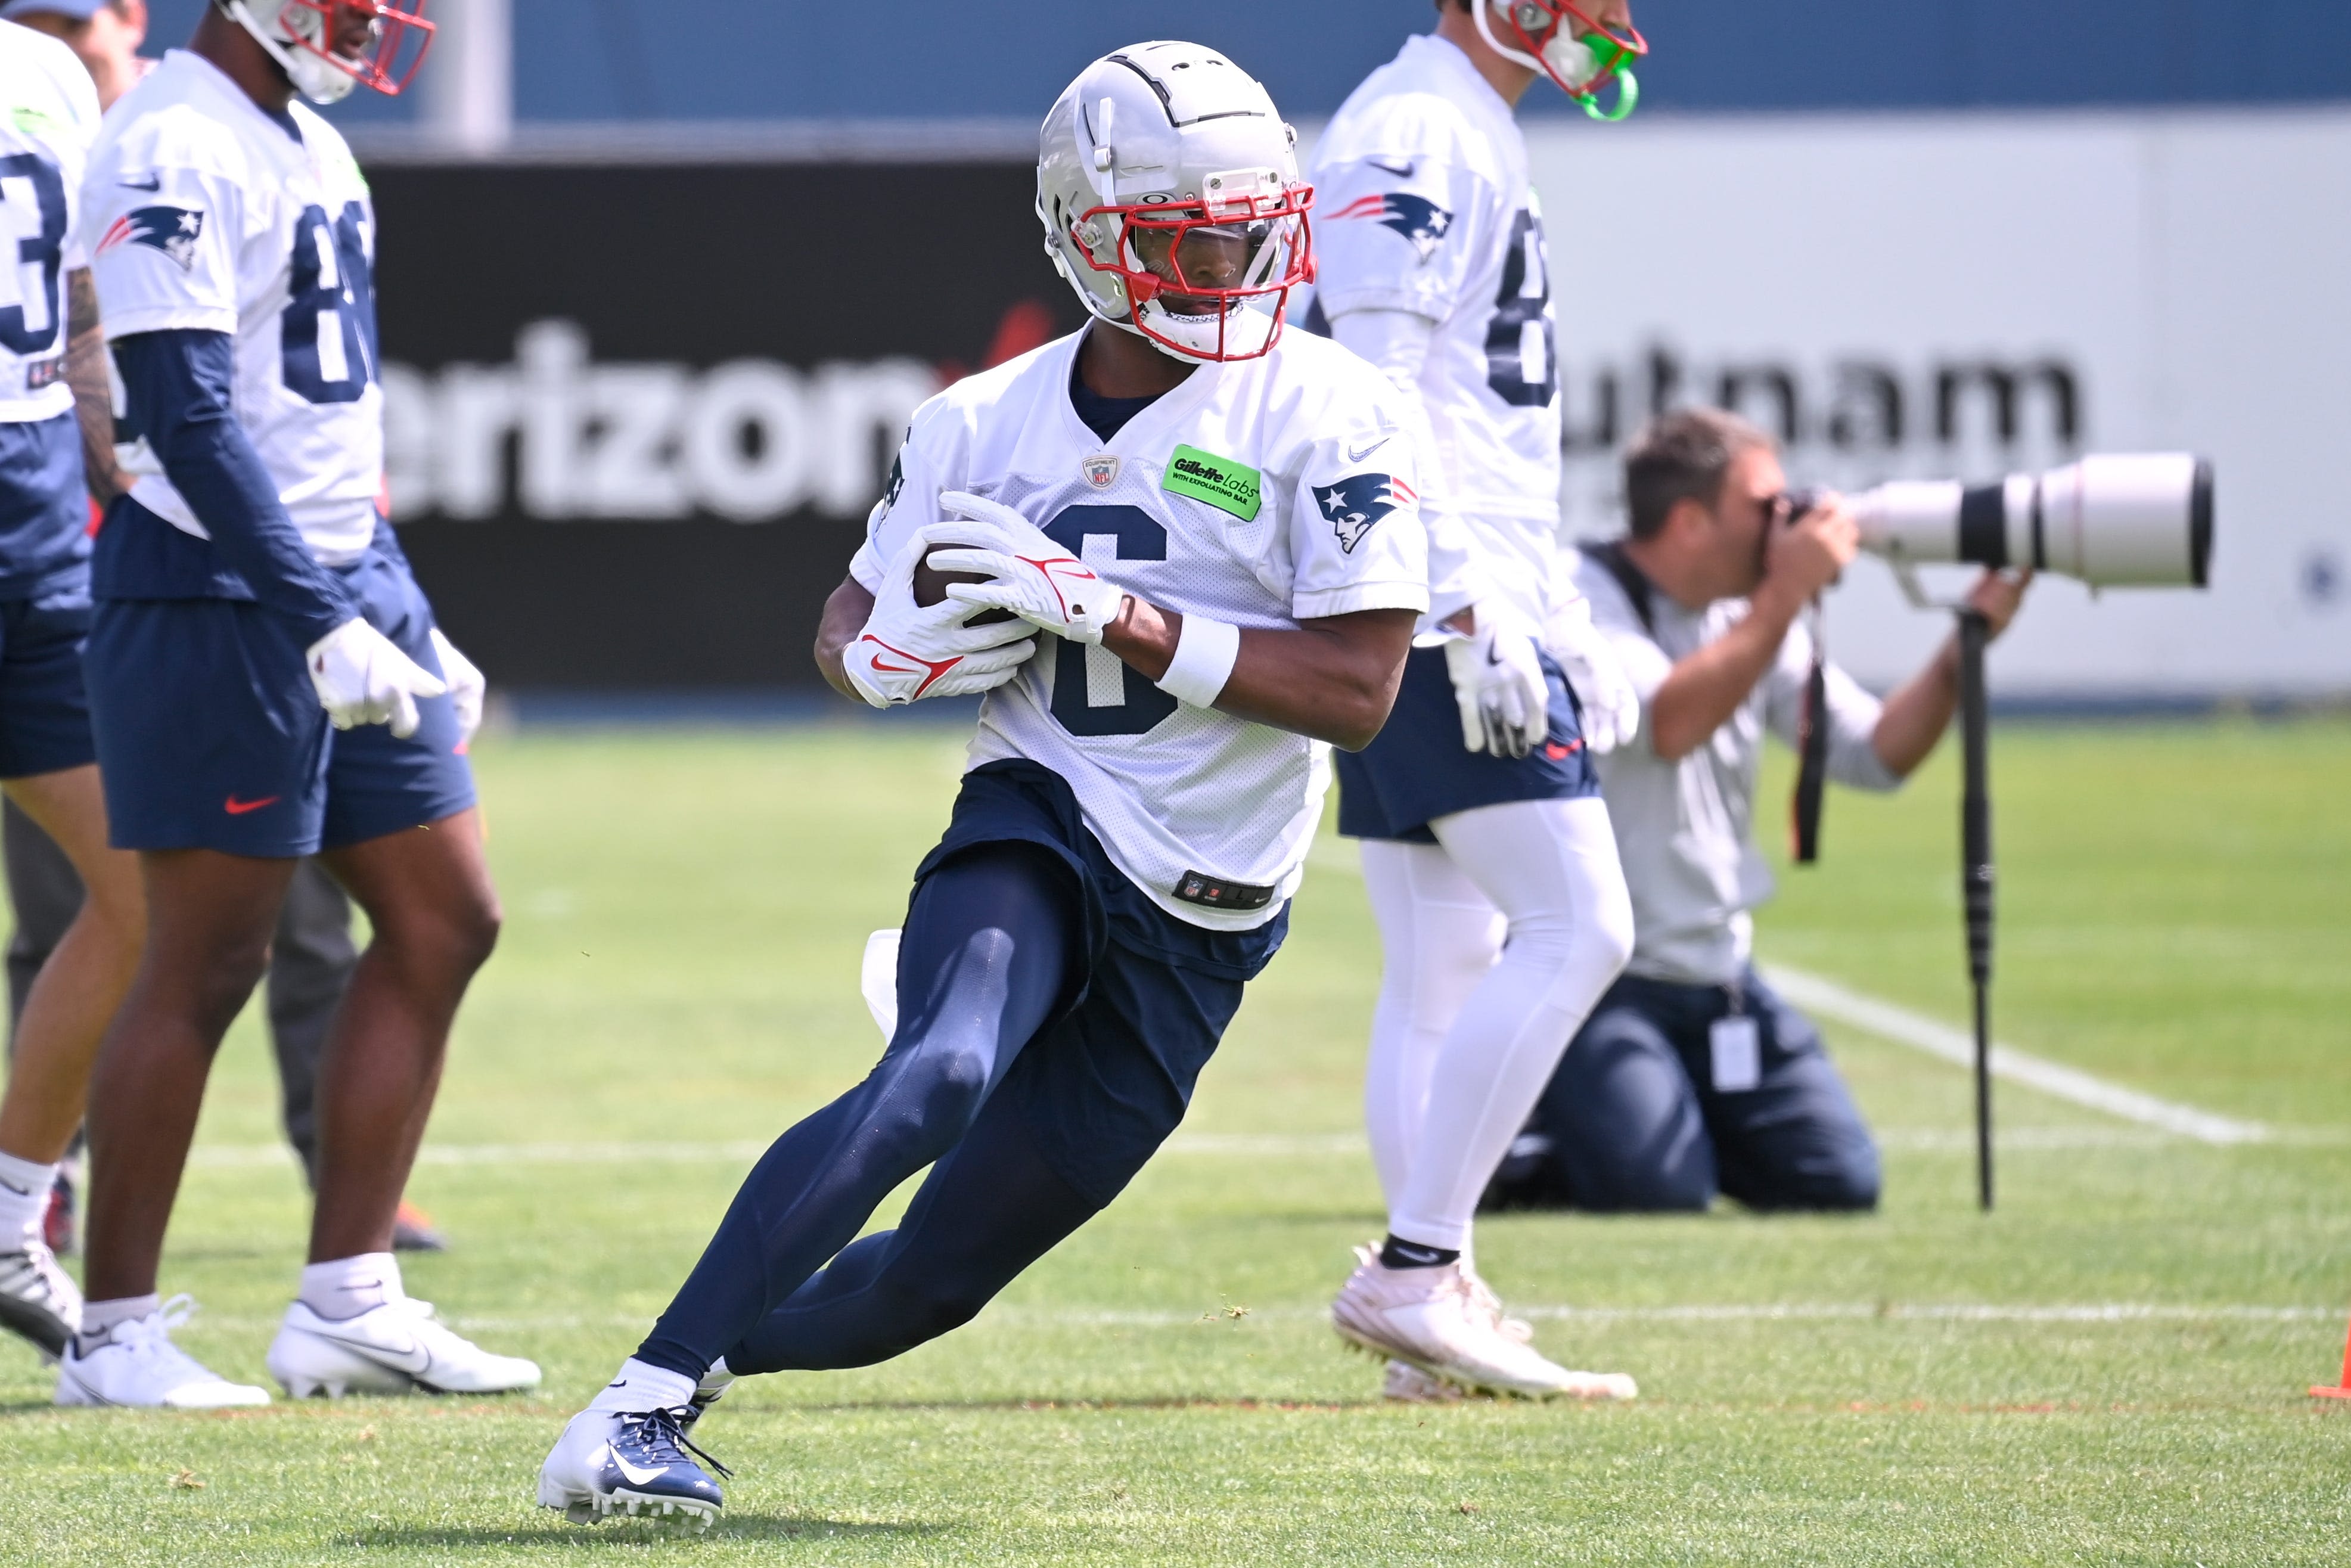 Here are 7 takeaways from Patriots rookie minicamp at Gillette Stadium